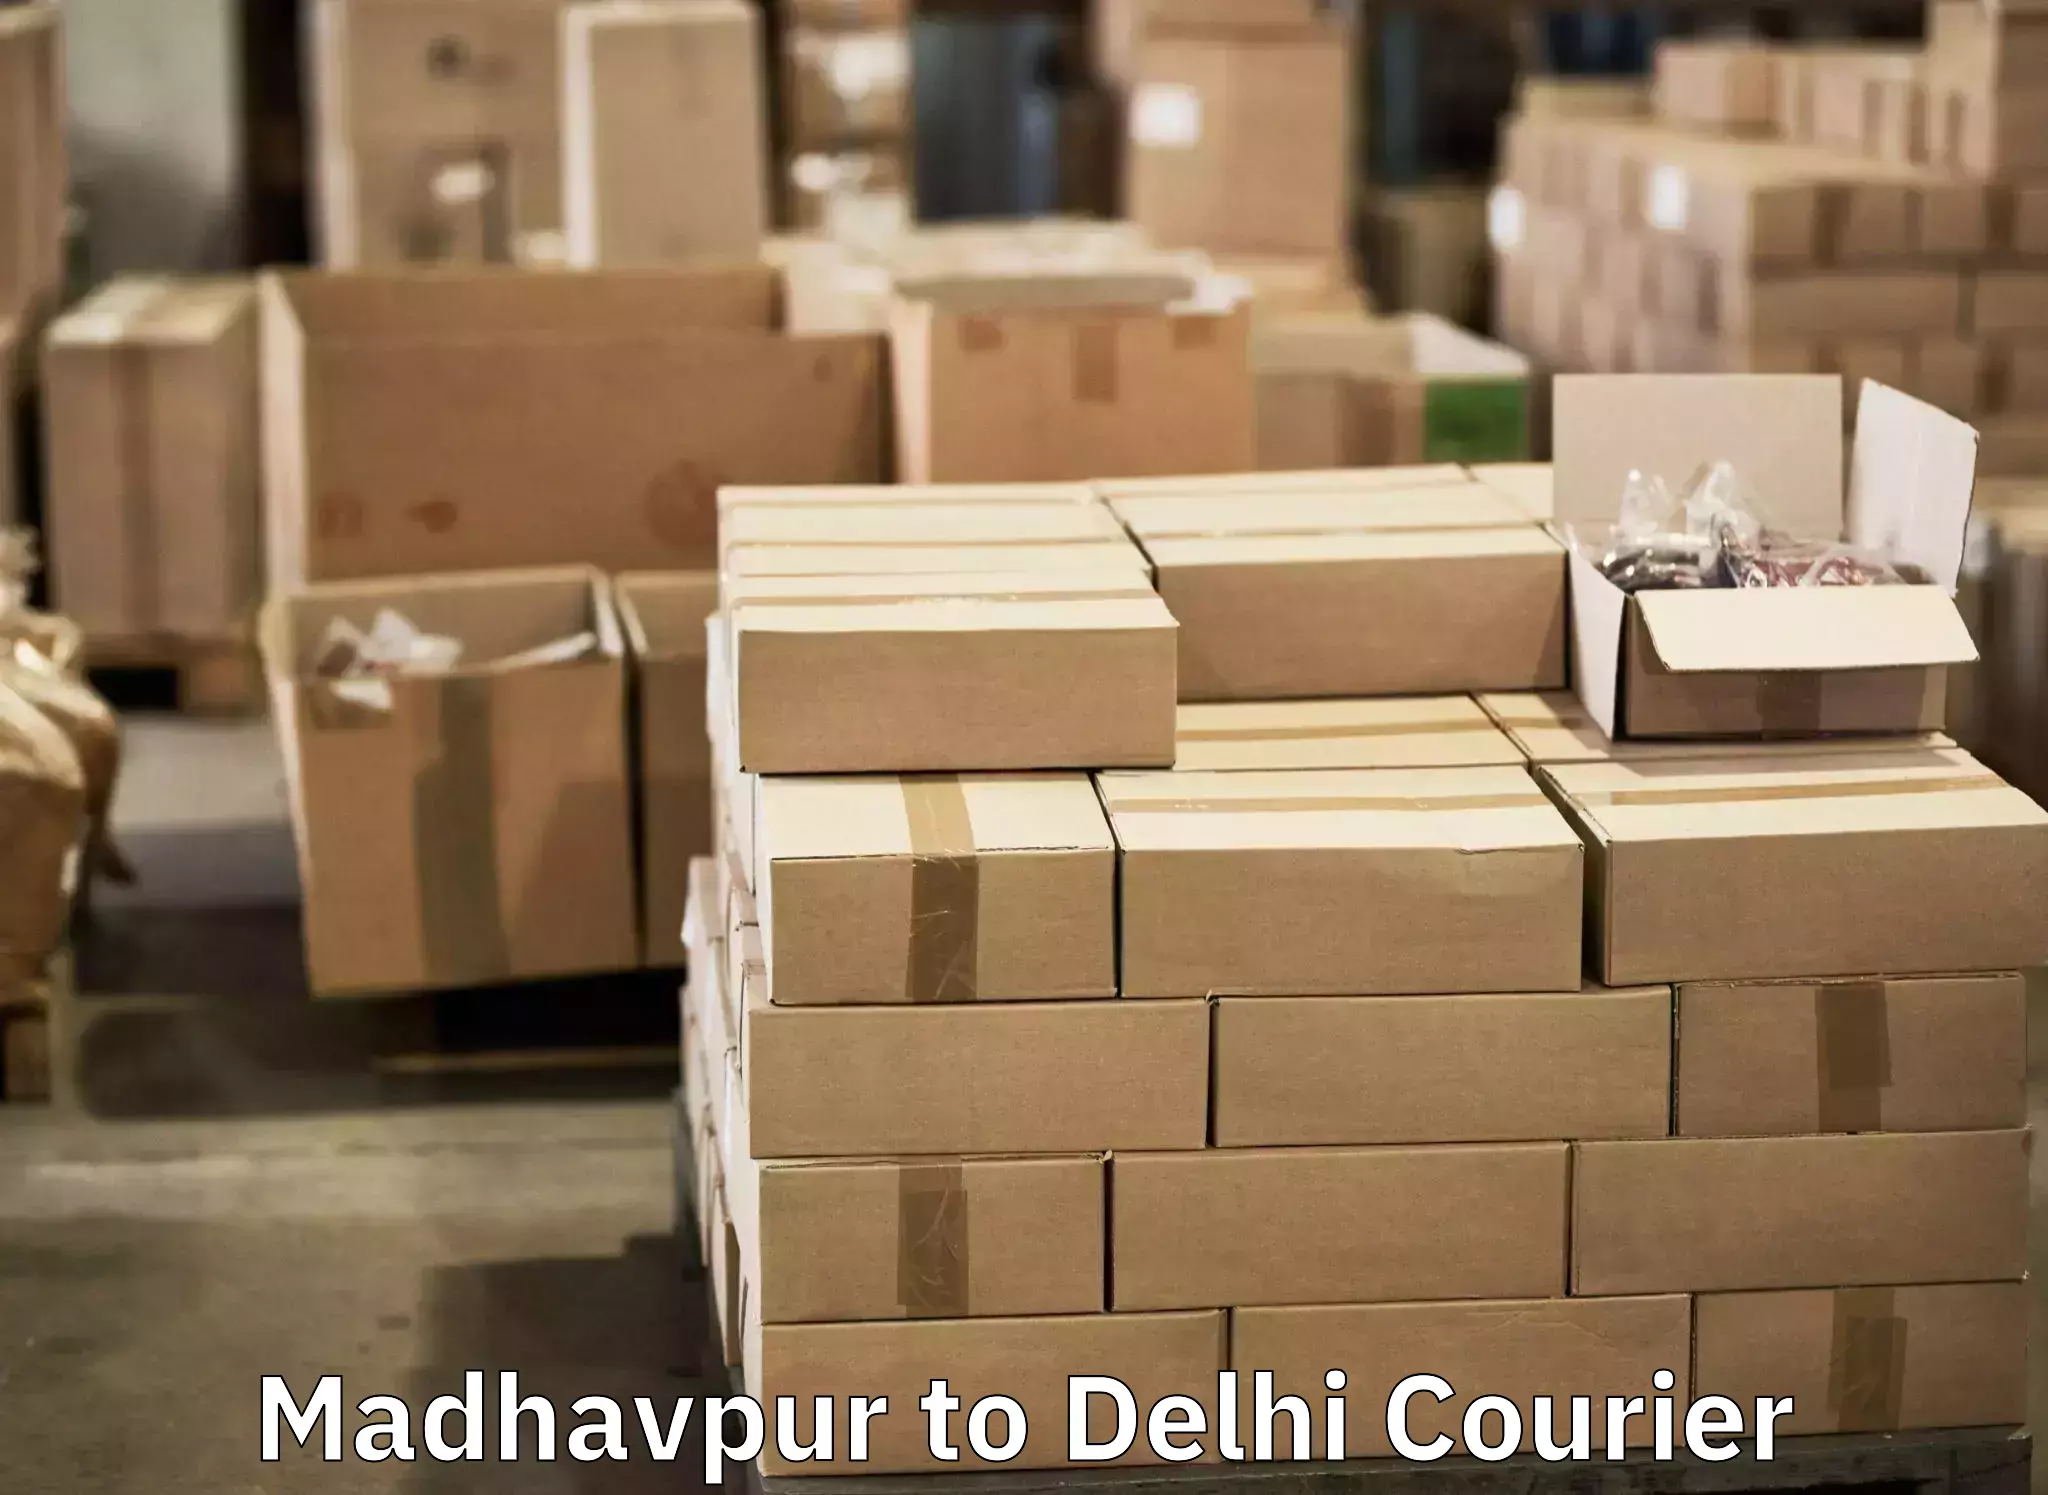 Same day luggage service Madhavpur to NCR